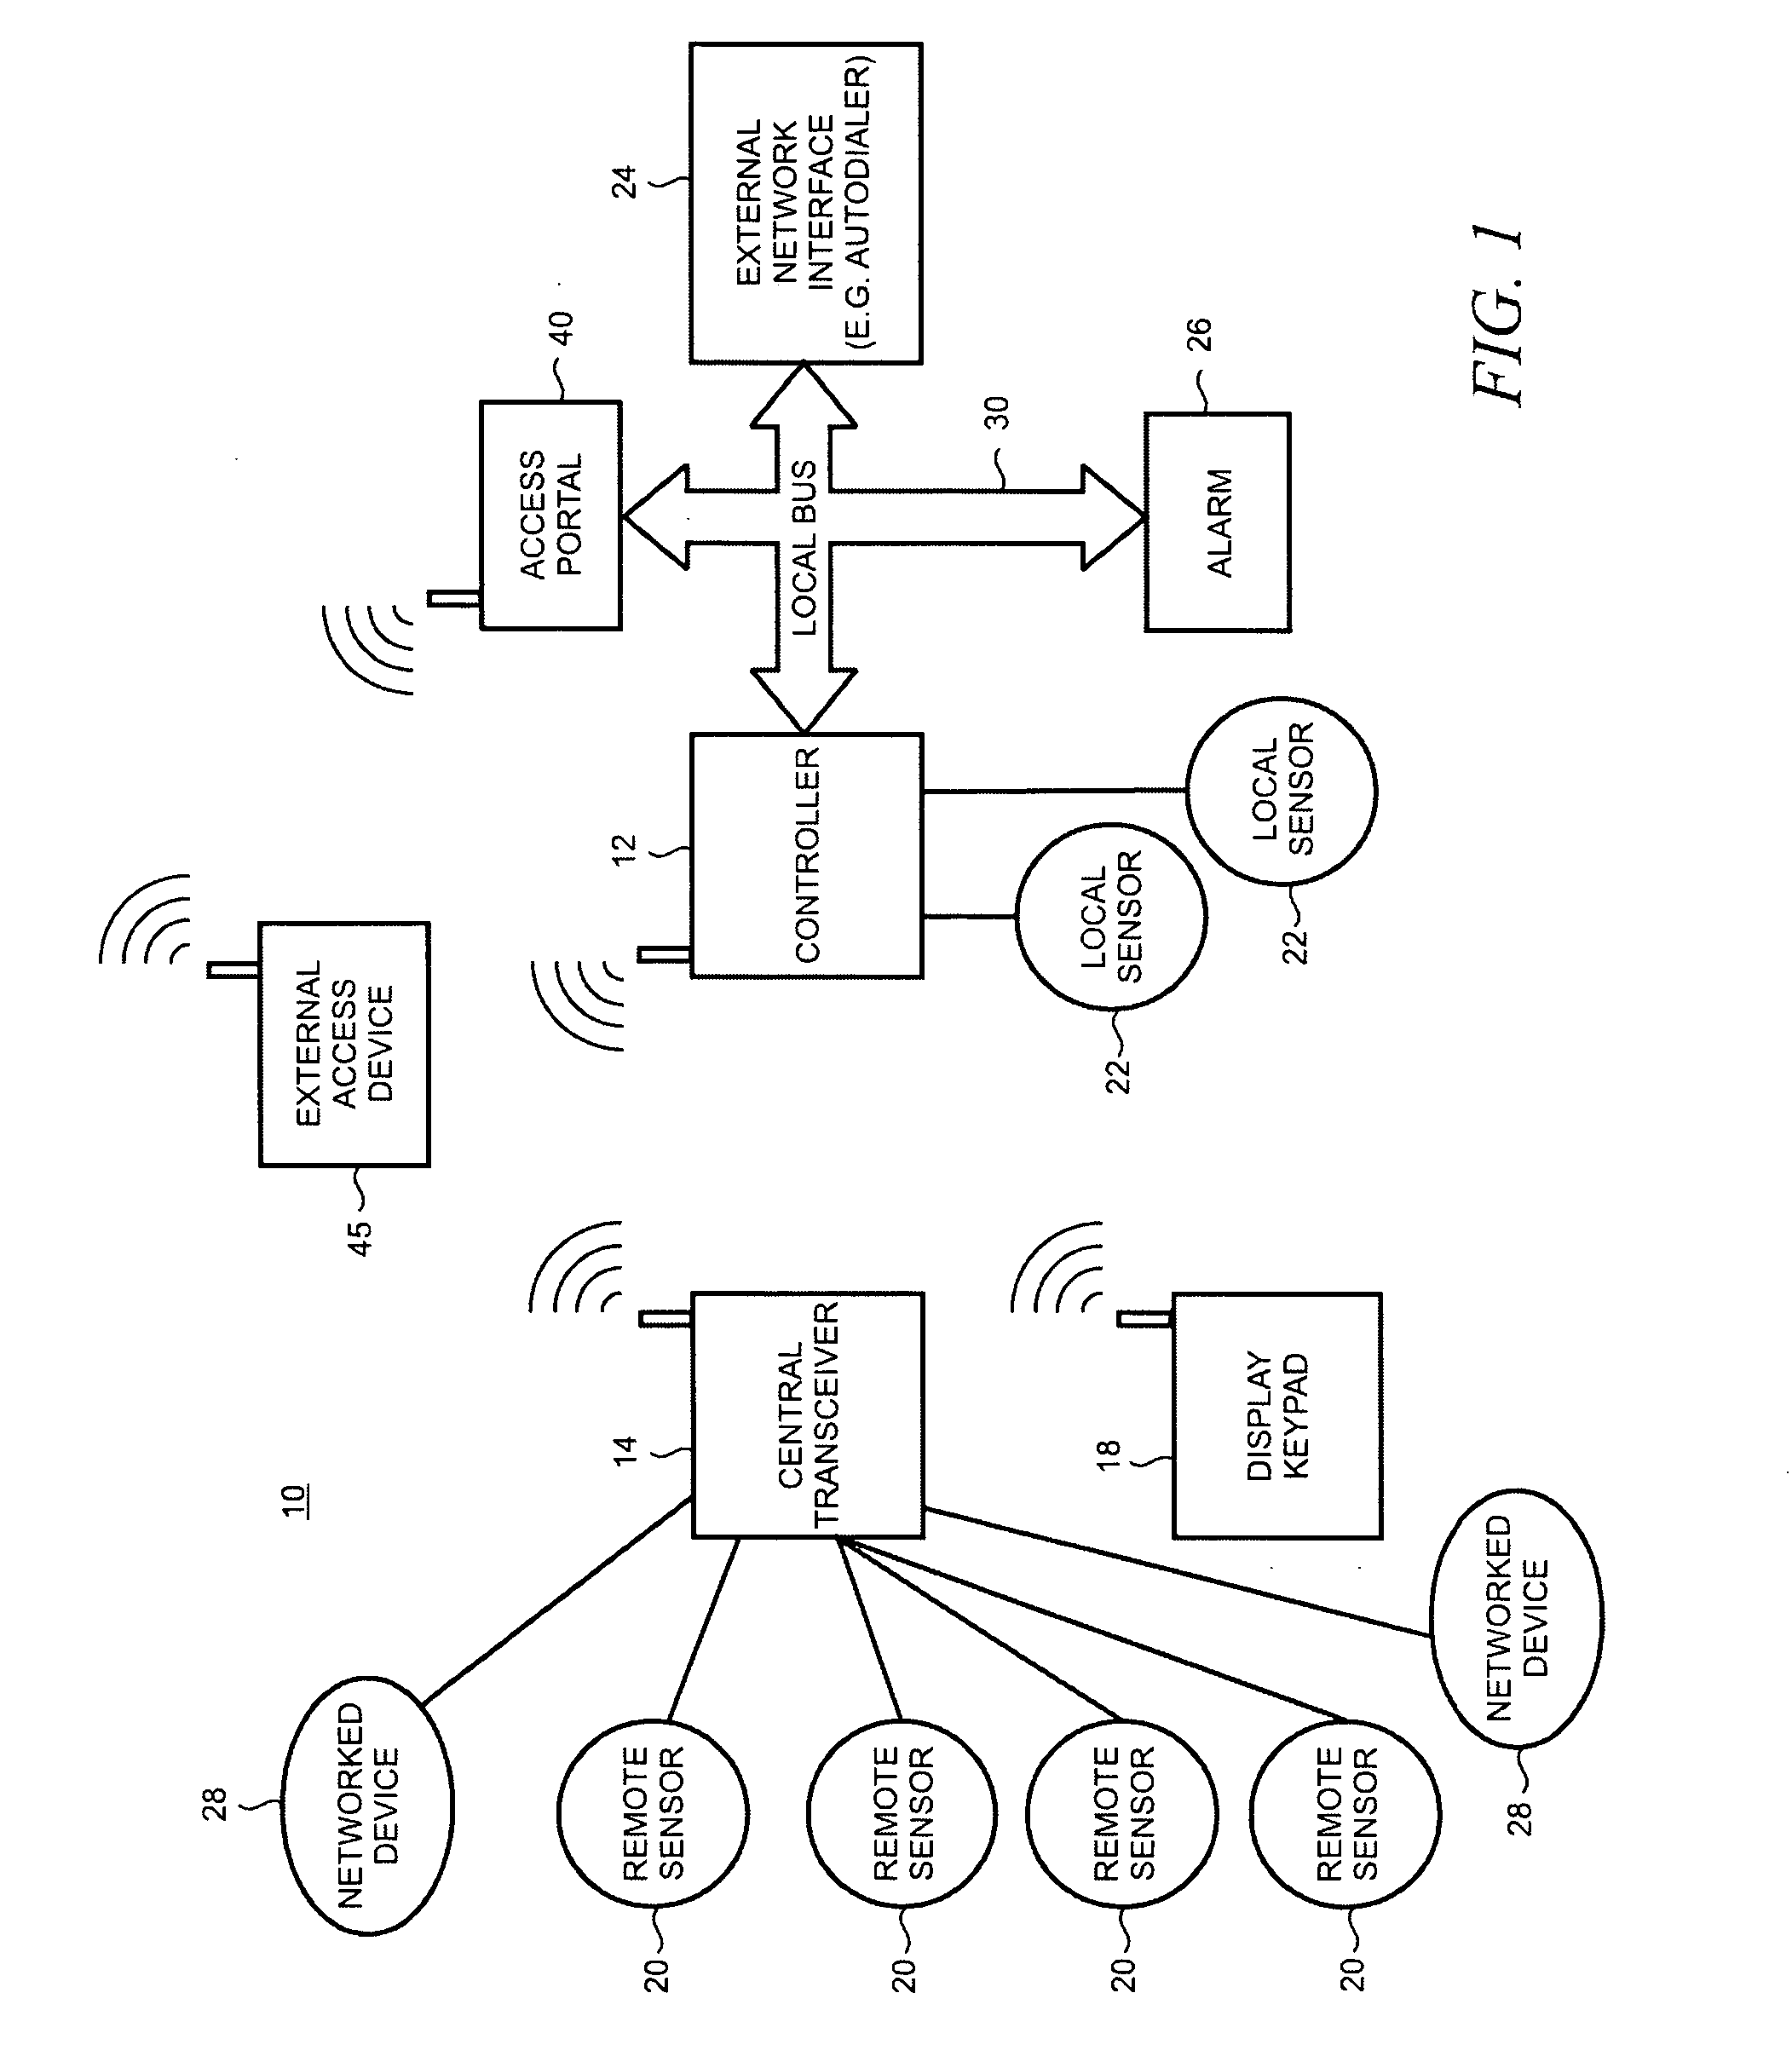 Method and apparatus for providing status information from a security and automation system to an emergency responder